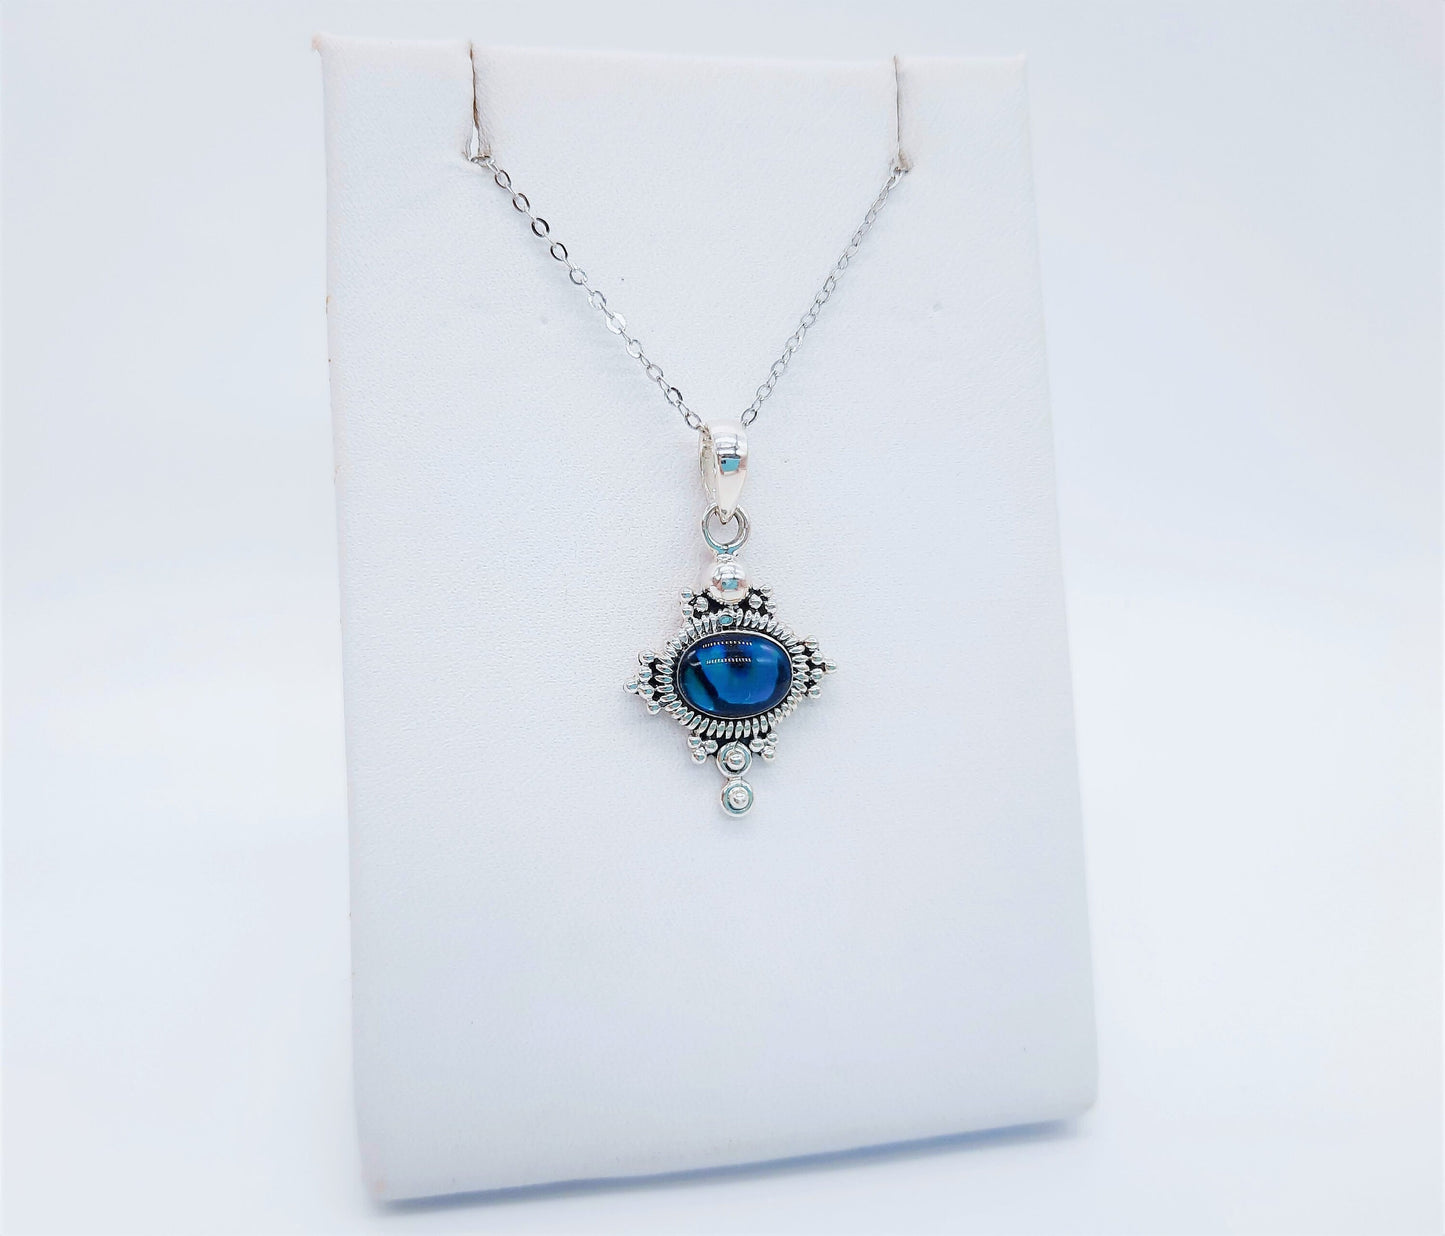 Genuine Blue Abalone Shell 925 Sterling Silver Pendant Necklace with 8x6mm Cabochon Setting Covered with Holographic Powder Infused Resin